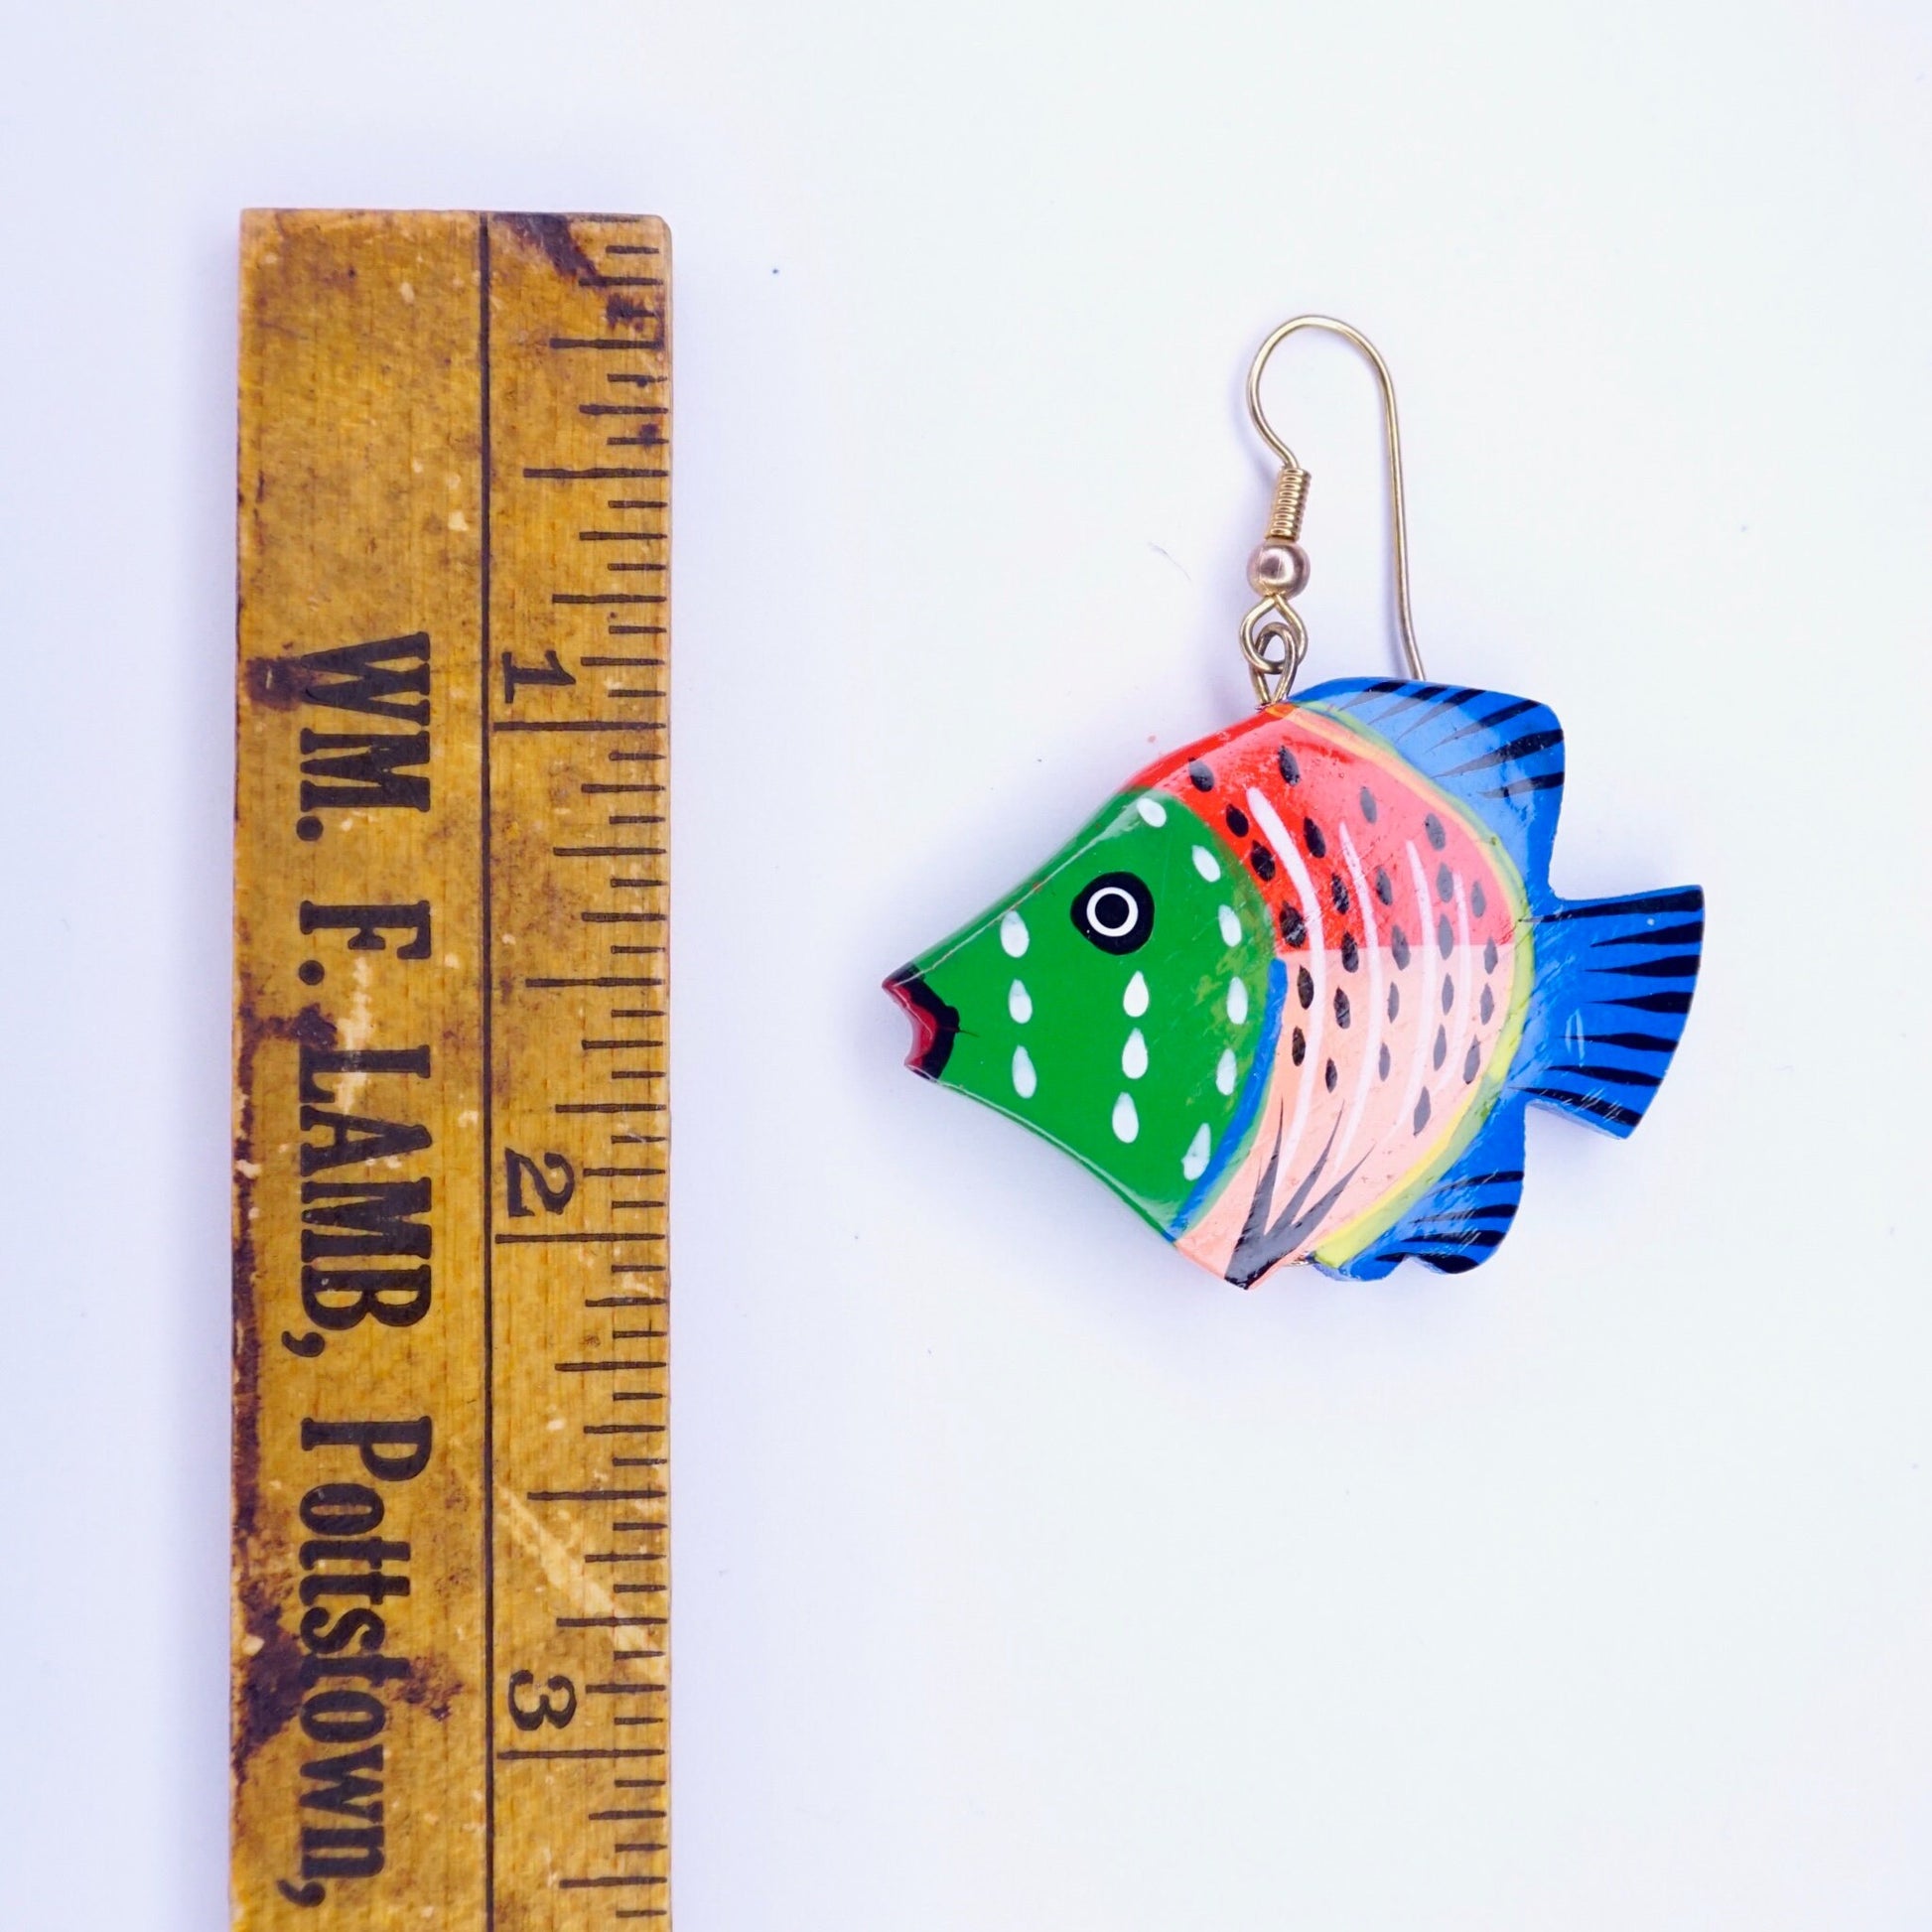 Alt text: Handmade vintage wood carved fish earrings with colorful paint detailing, displayed next to a ruler for scale.